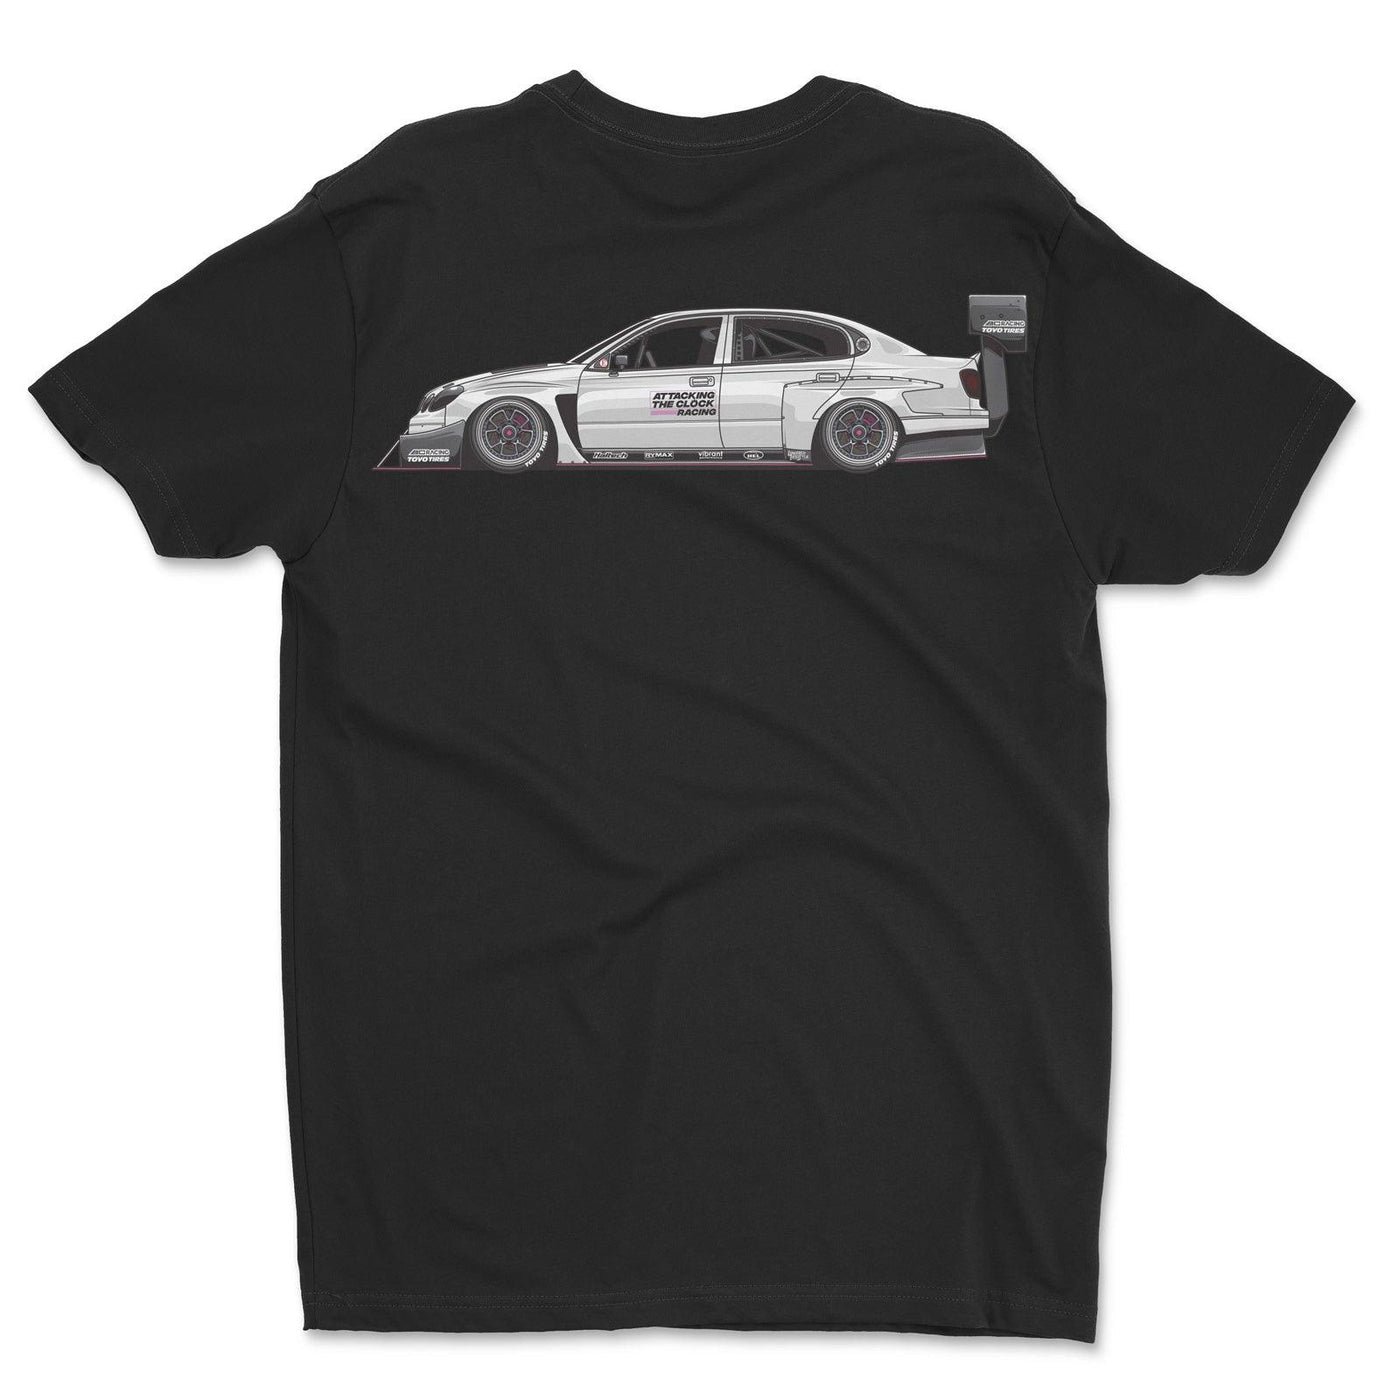 GS300 Time Attack Shop Build T-Shirt - Attacking the Clock Racing